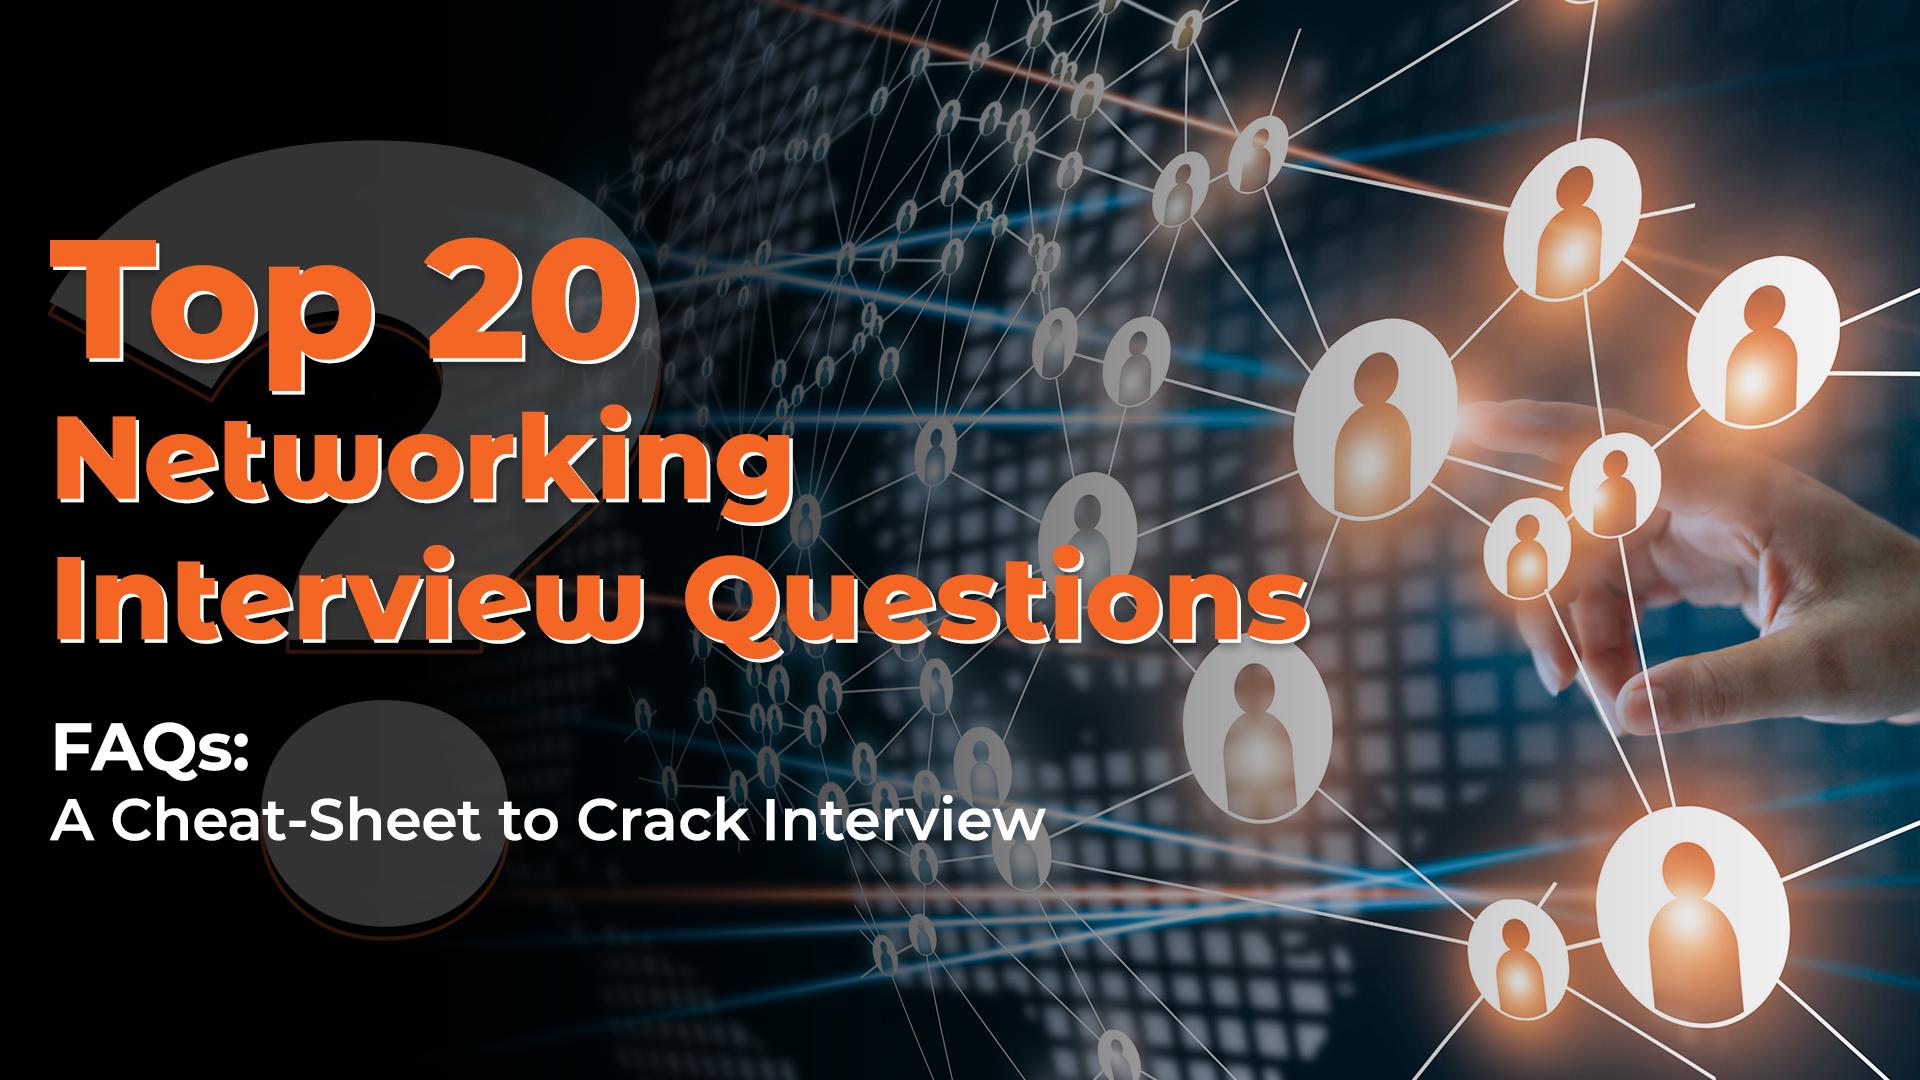 Top 20 Networking Interview Questions. FAQs: A Cheat-Sheet to Crack Interview 